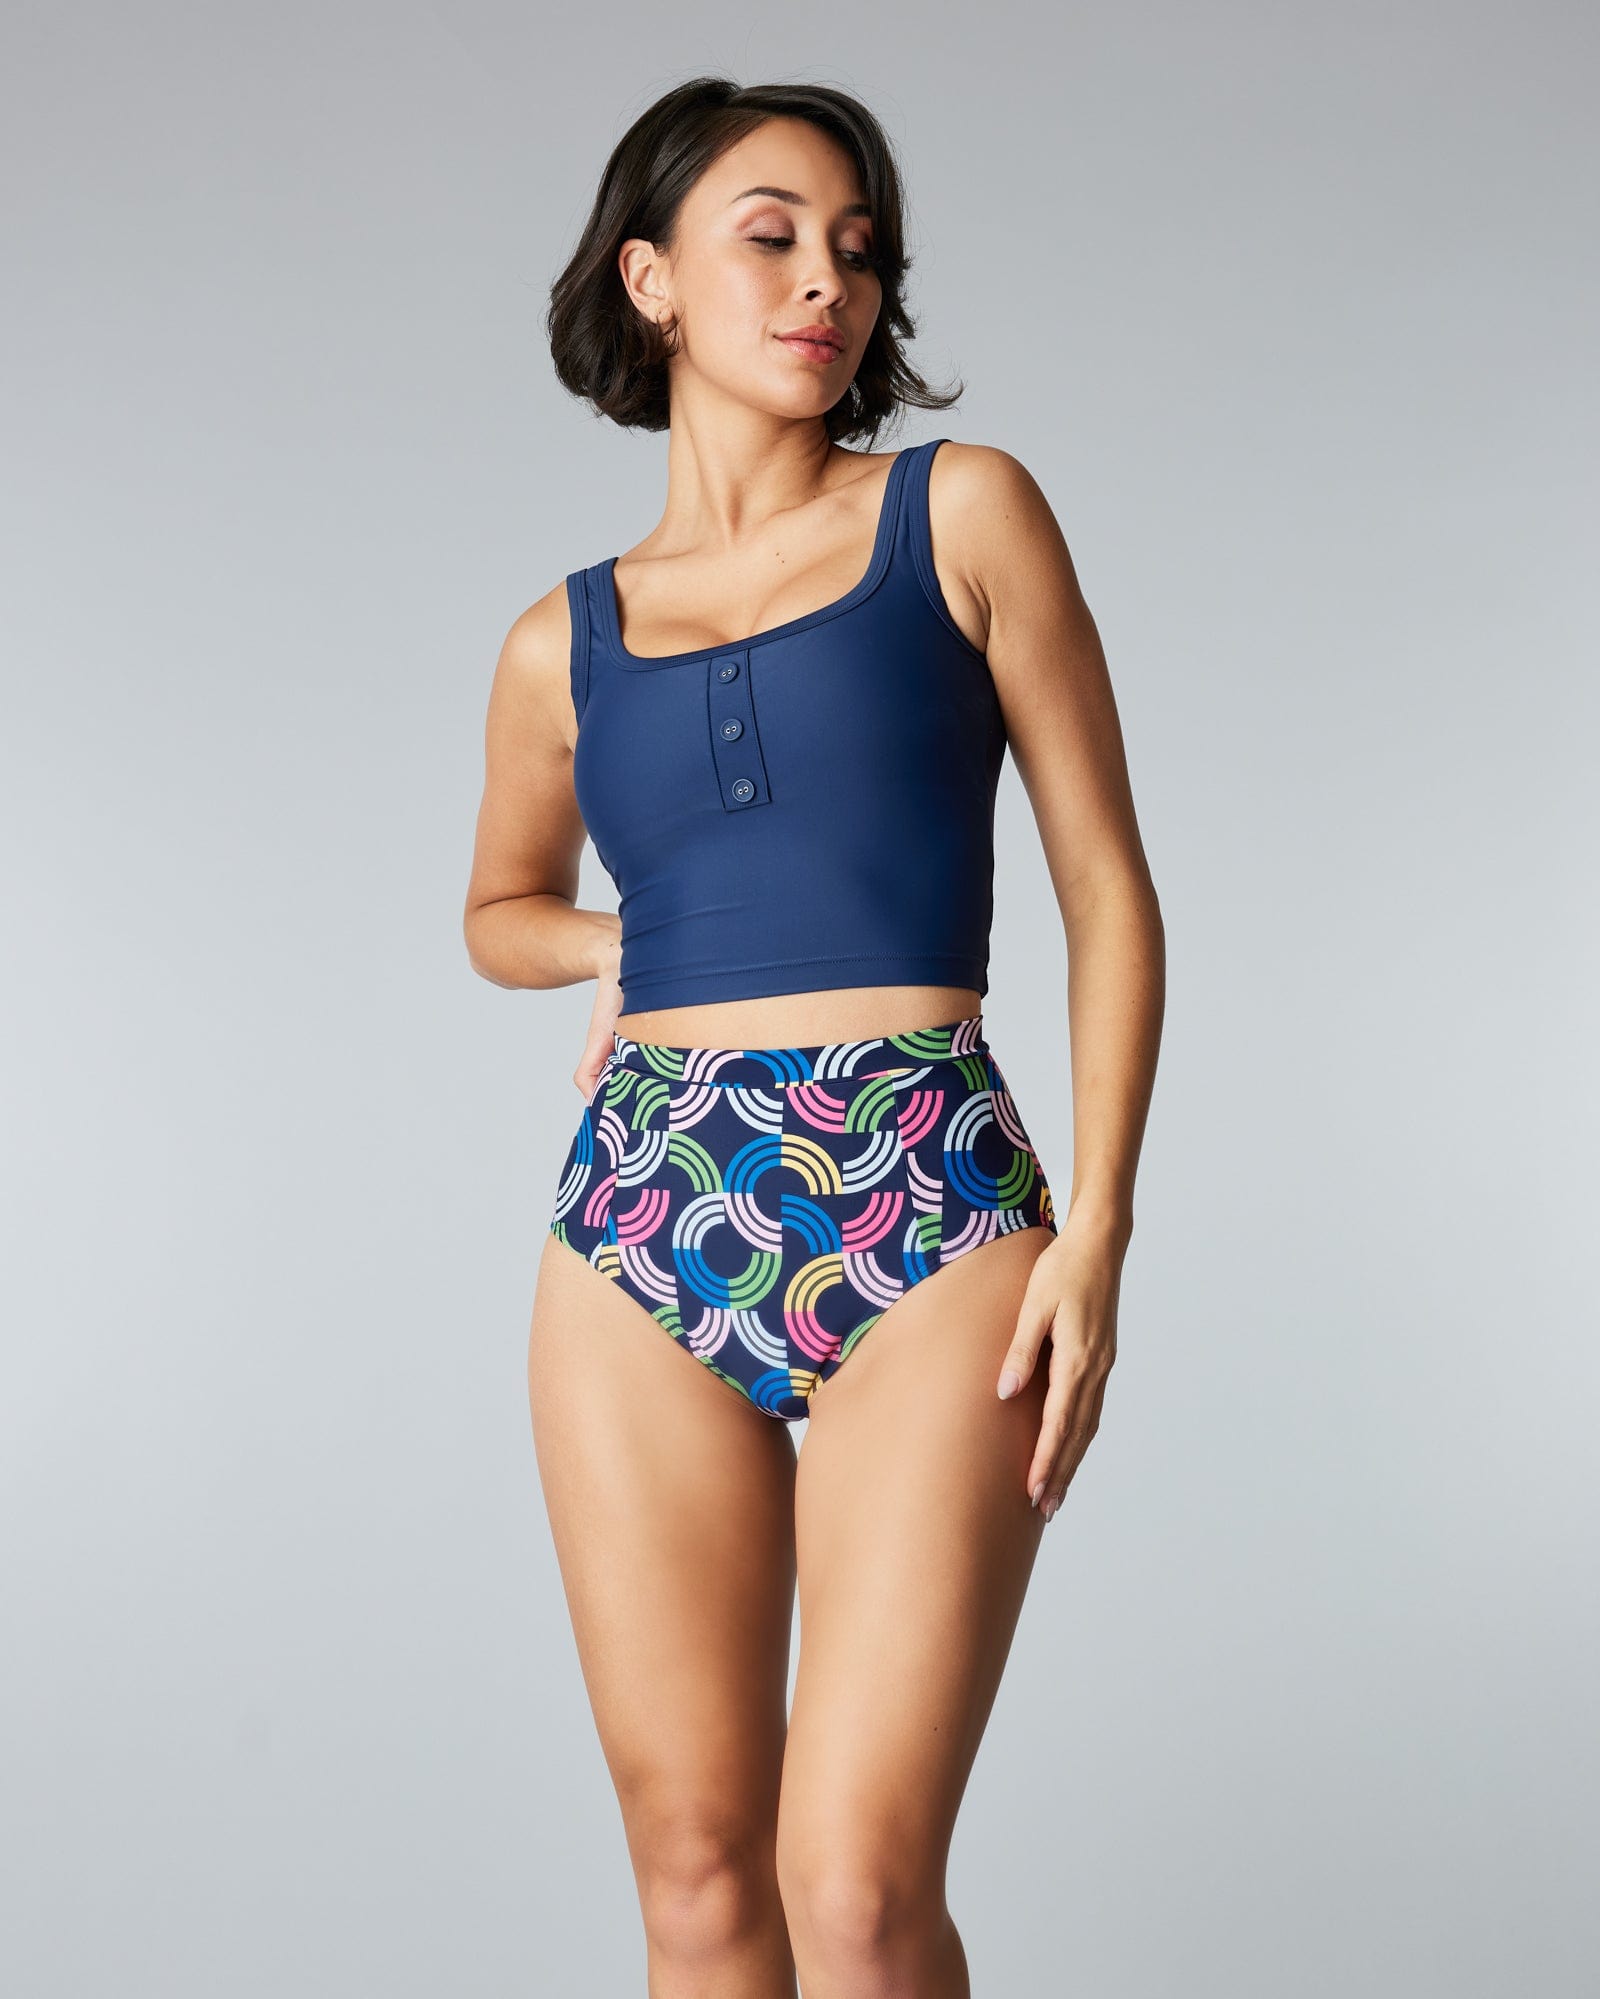 Woman in a two-piece swimsuit with a solid blue top and a rainbow print and patterned bottom.